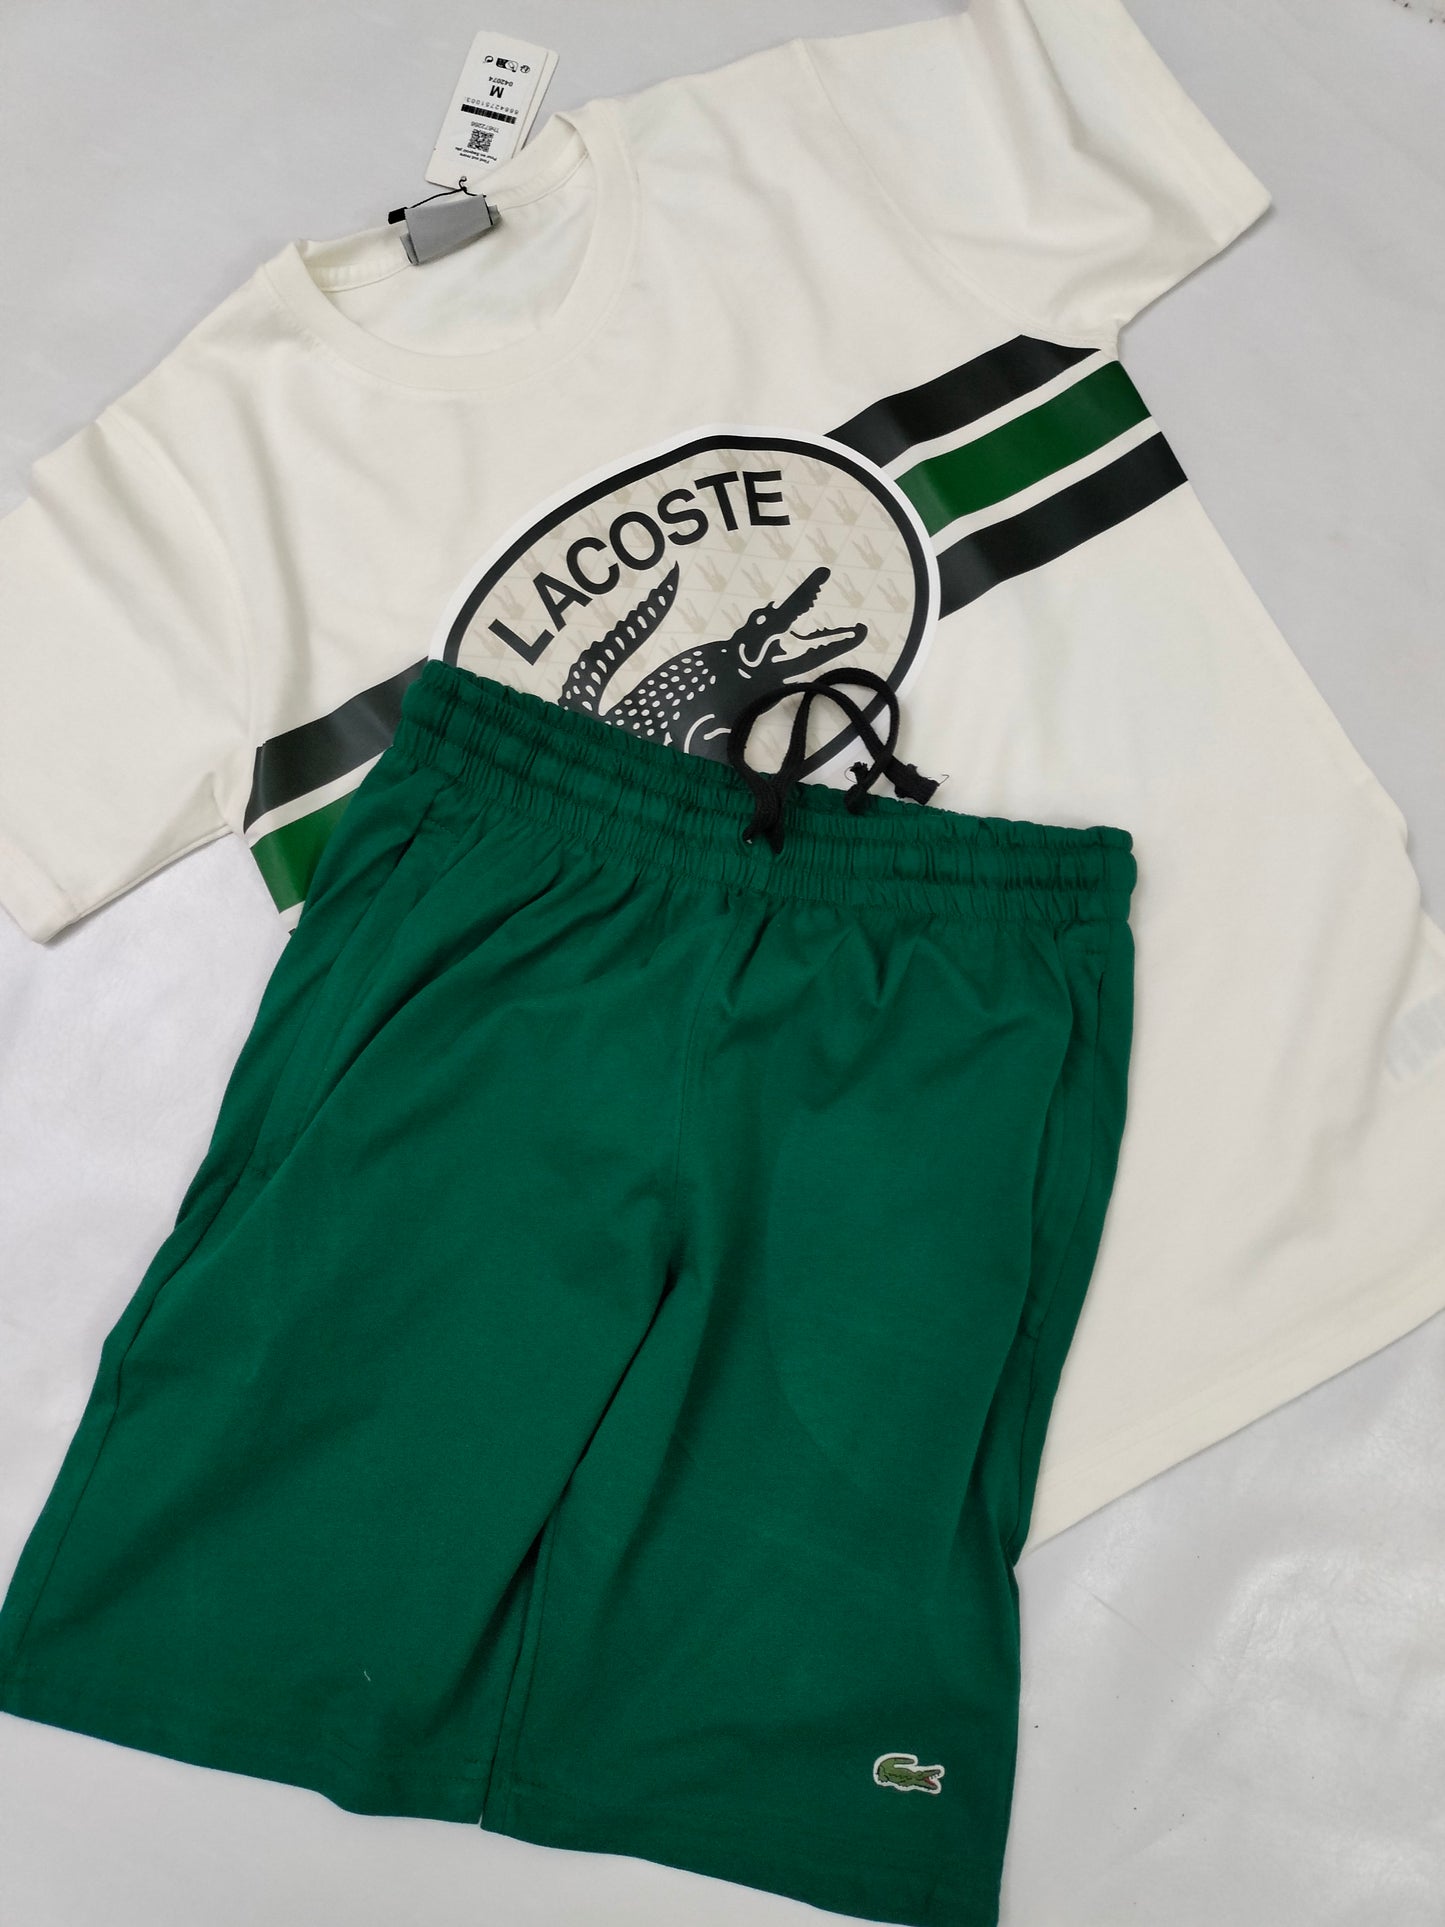 Lacoste Monogram Inspired Tracksuits